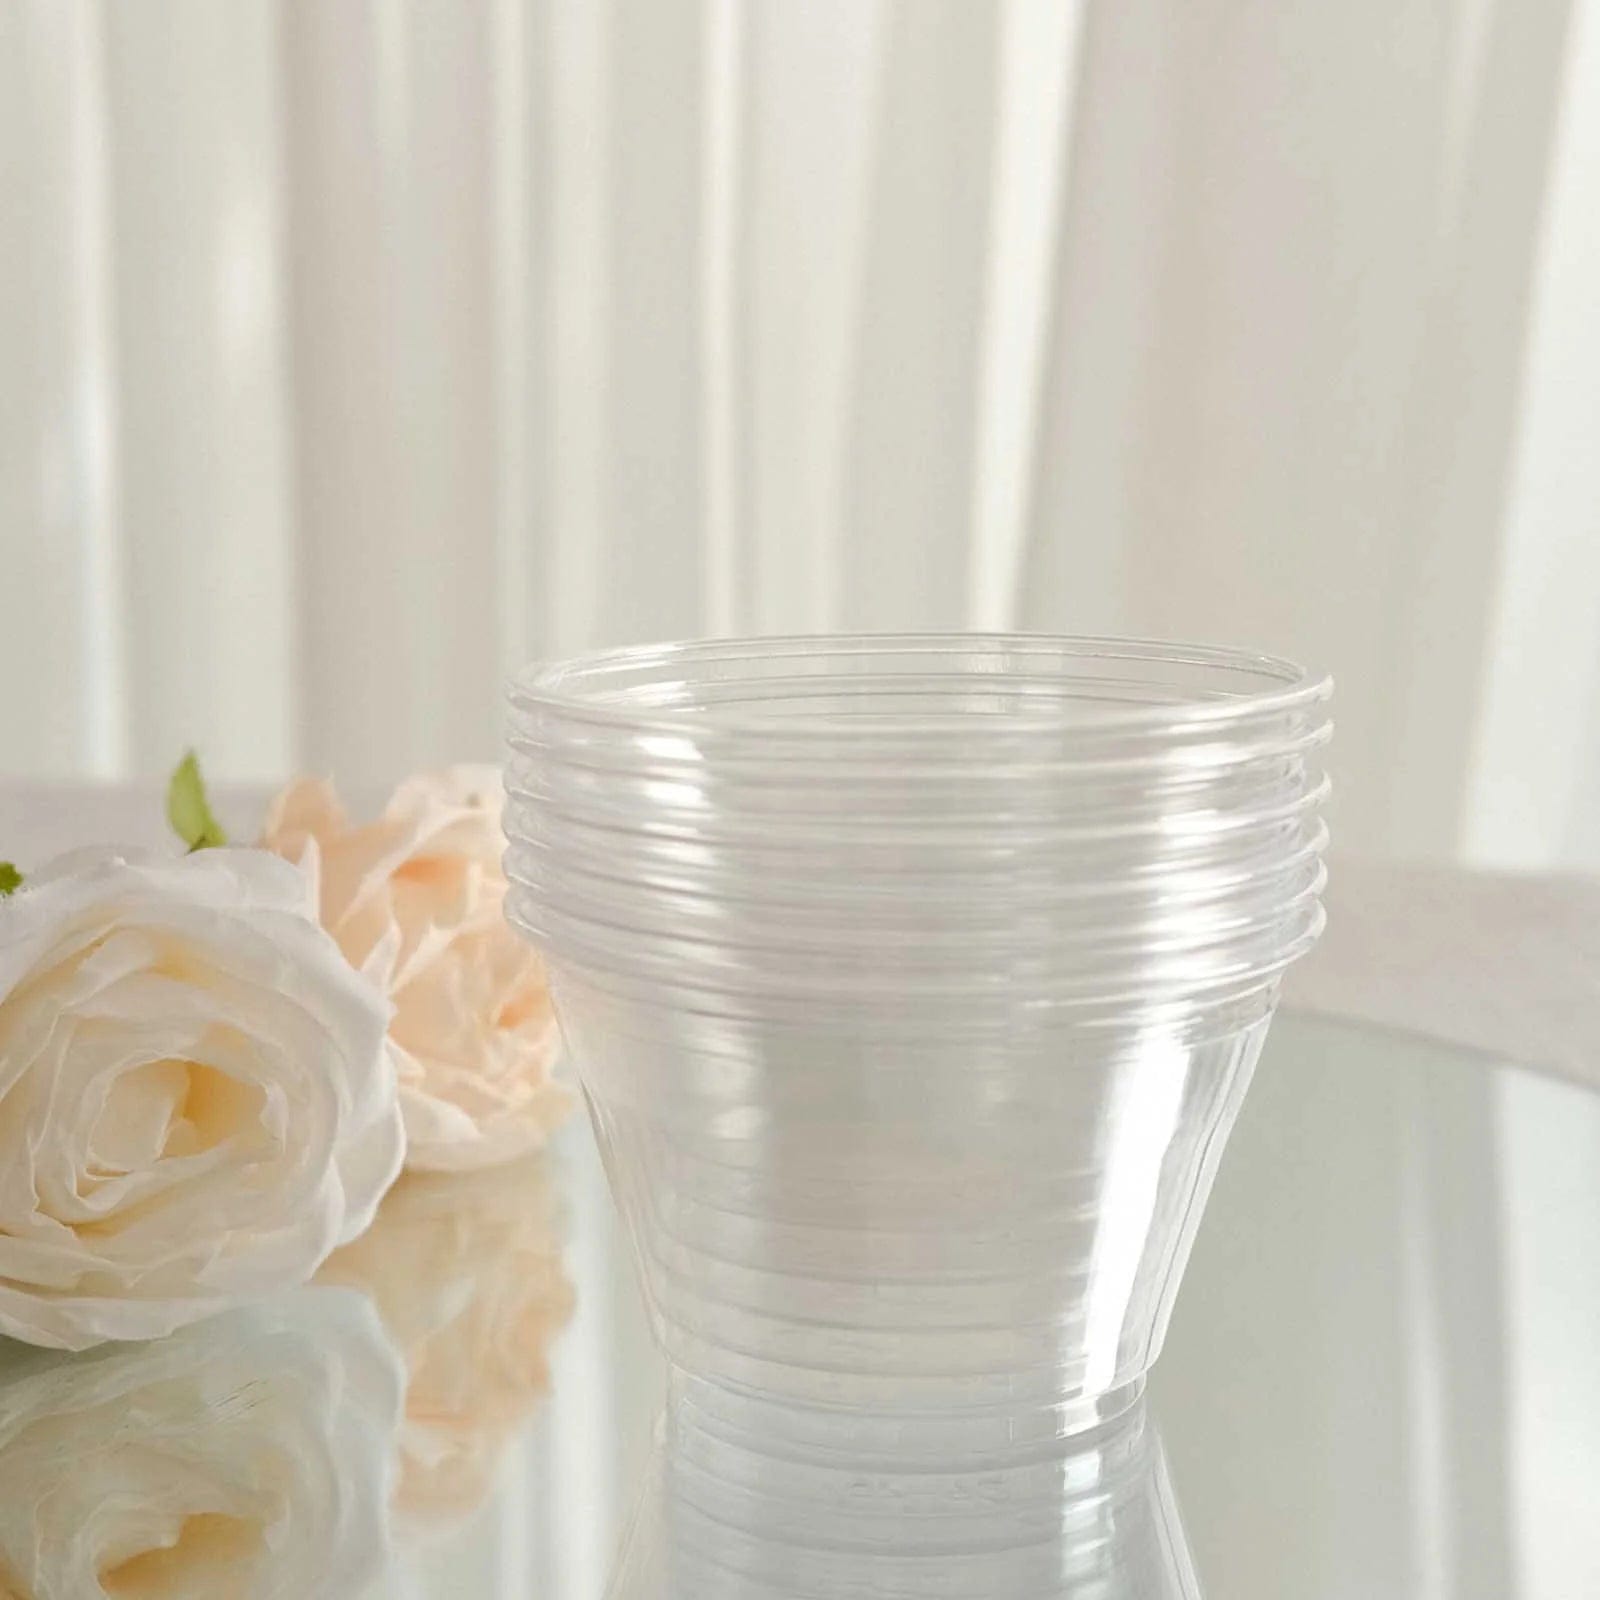 50 Clear 7 oz Disposable Round Plastic Dessert Cups with Dome Lids